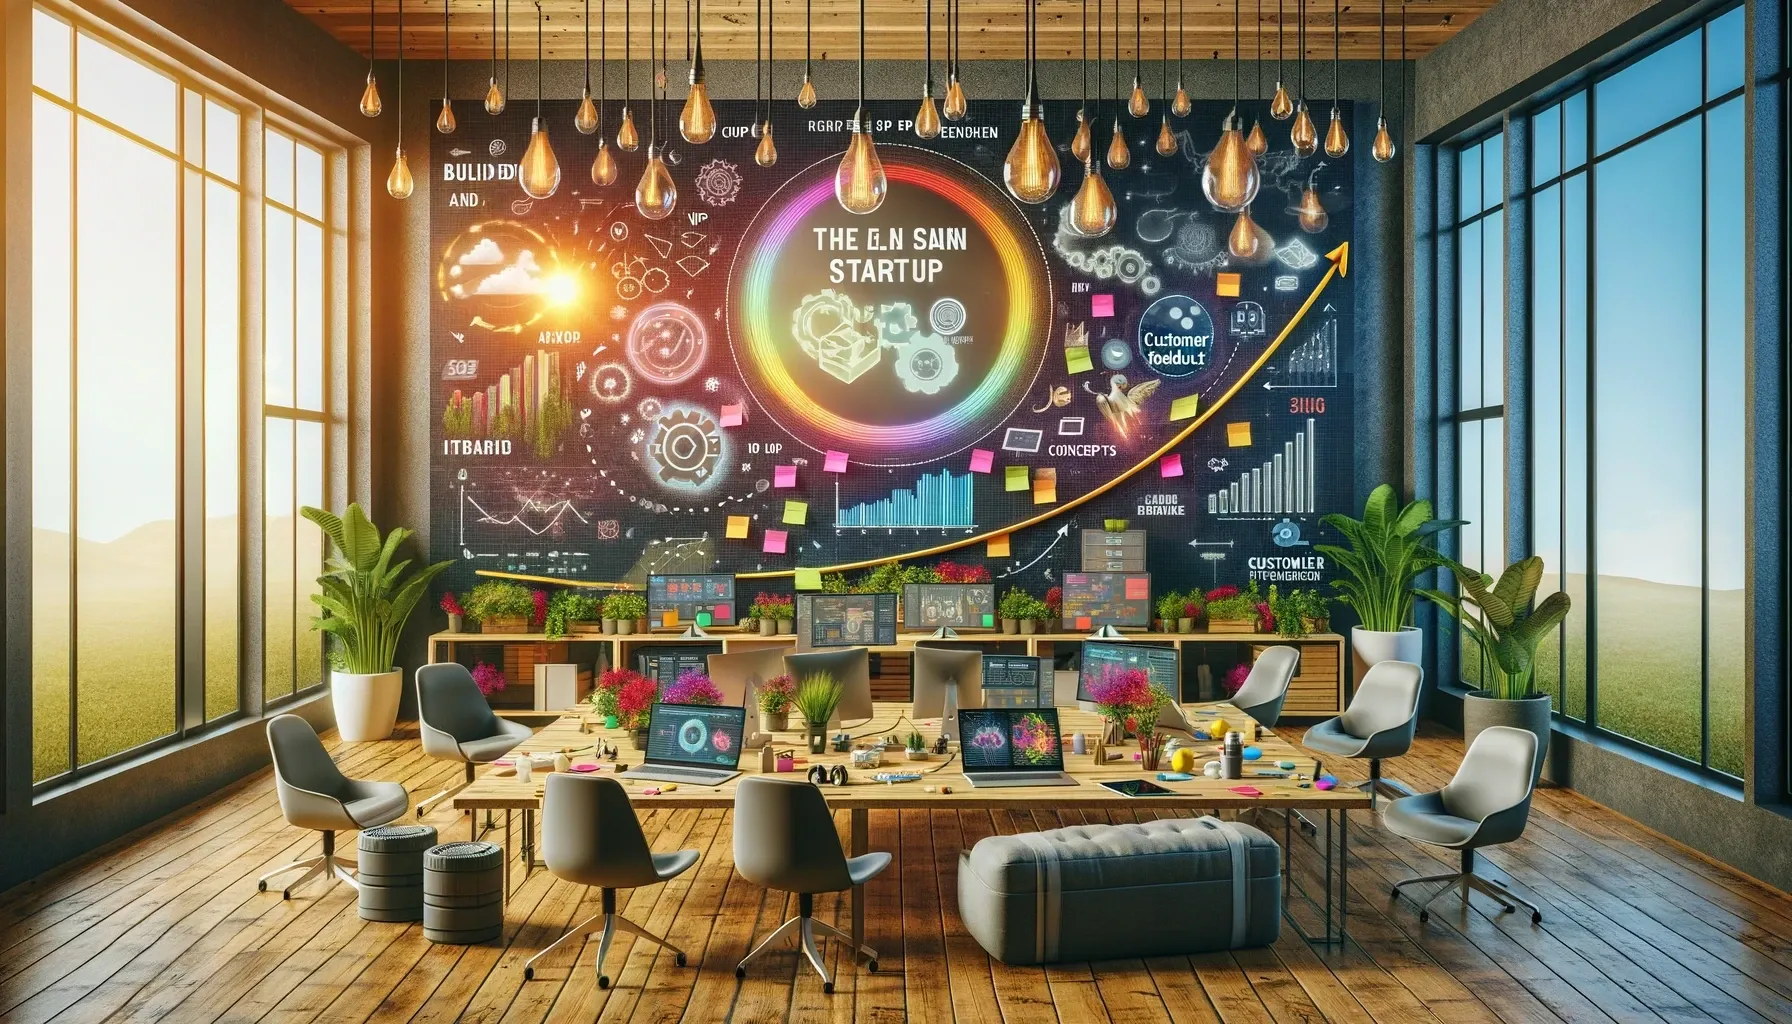 Blackboard with charts showing growth, iconography of cogs, and cloud servers behind a meeting table covered in open laptops.